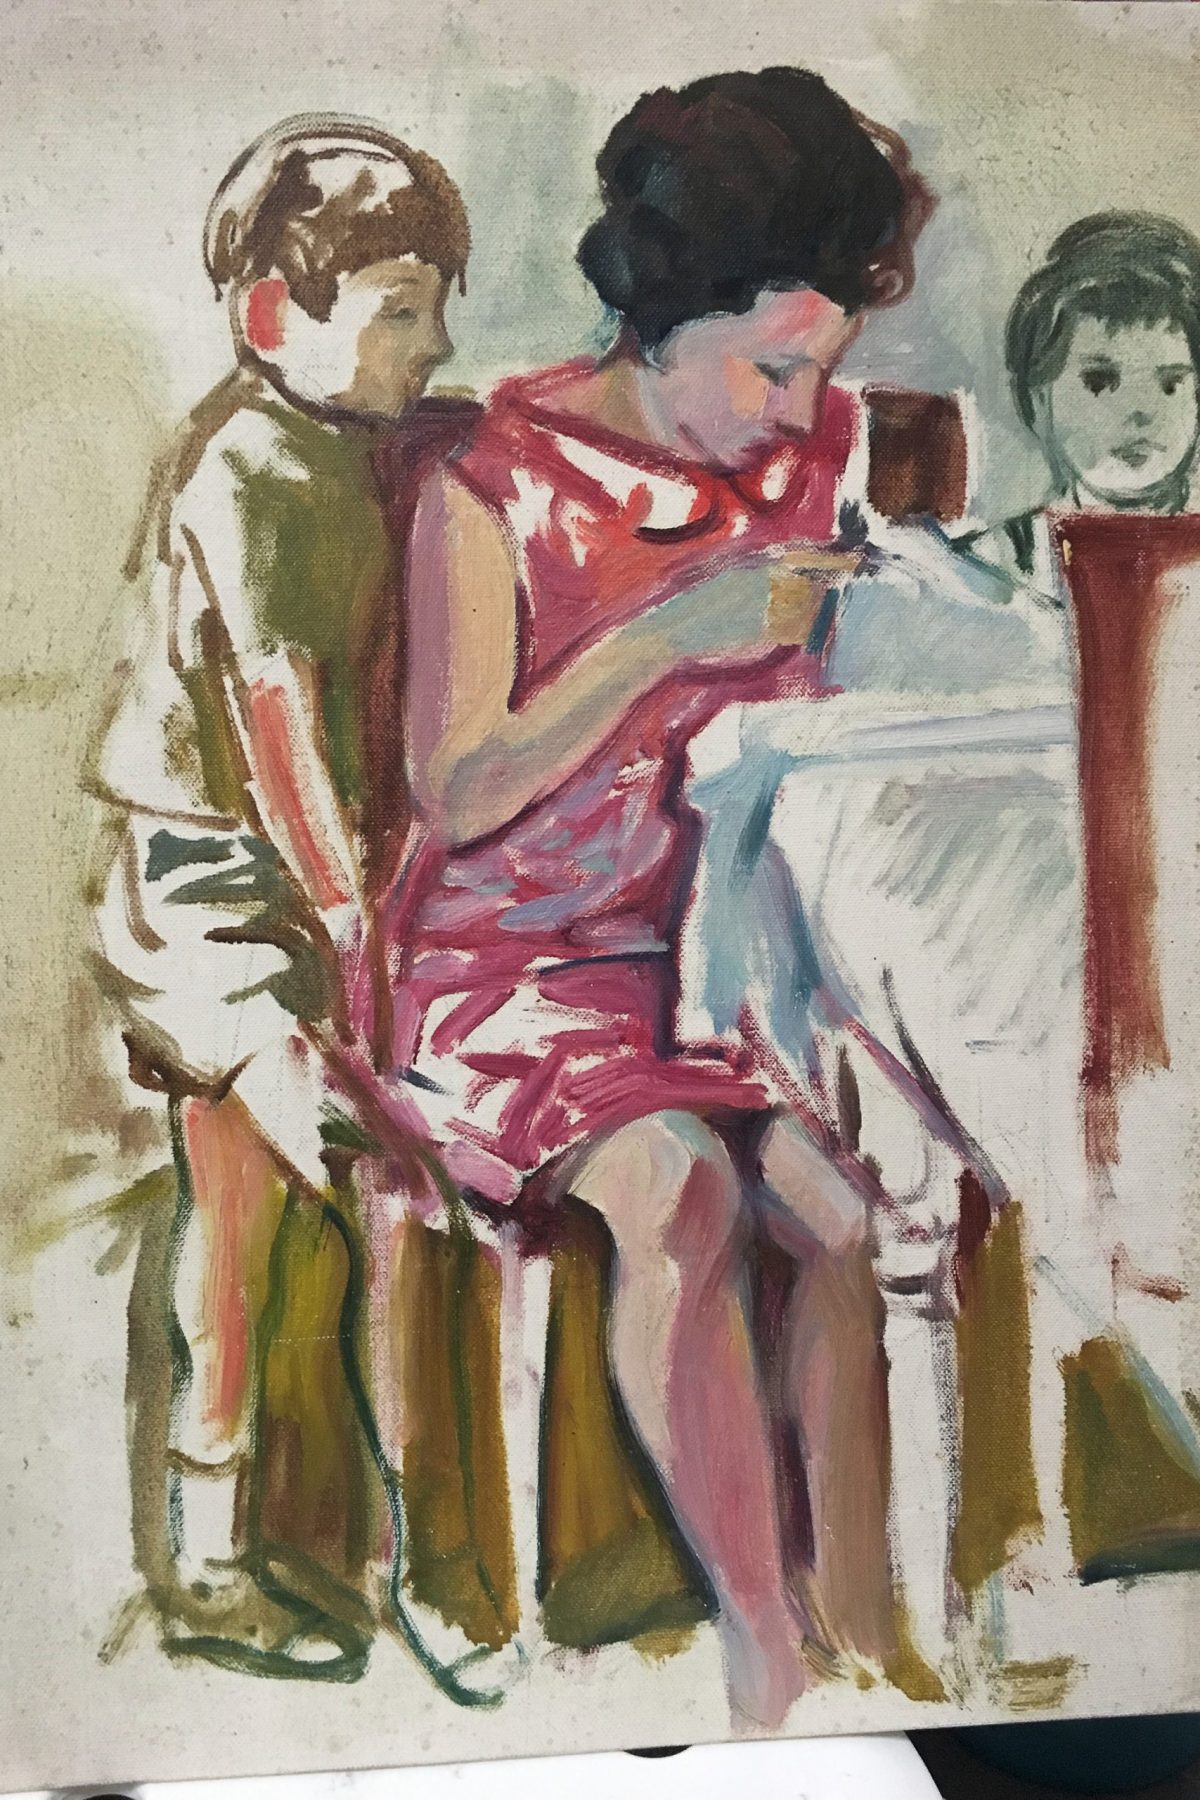 Mum sewing, with Alessandro and myself watching her
Oil painted by my father, some fifty years ago. This painting was stacked with
hundreds of other art works in my parents' house, which we had to sell - and
empty - in July 2019. I used my Canon EOS RP to document the process.